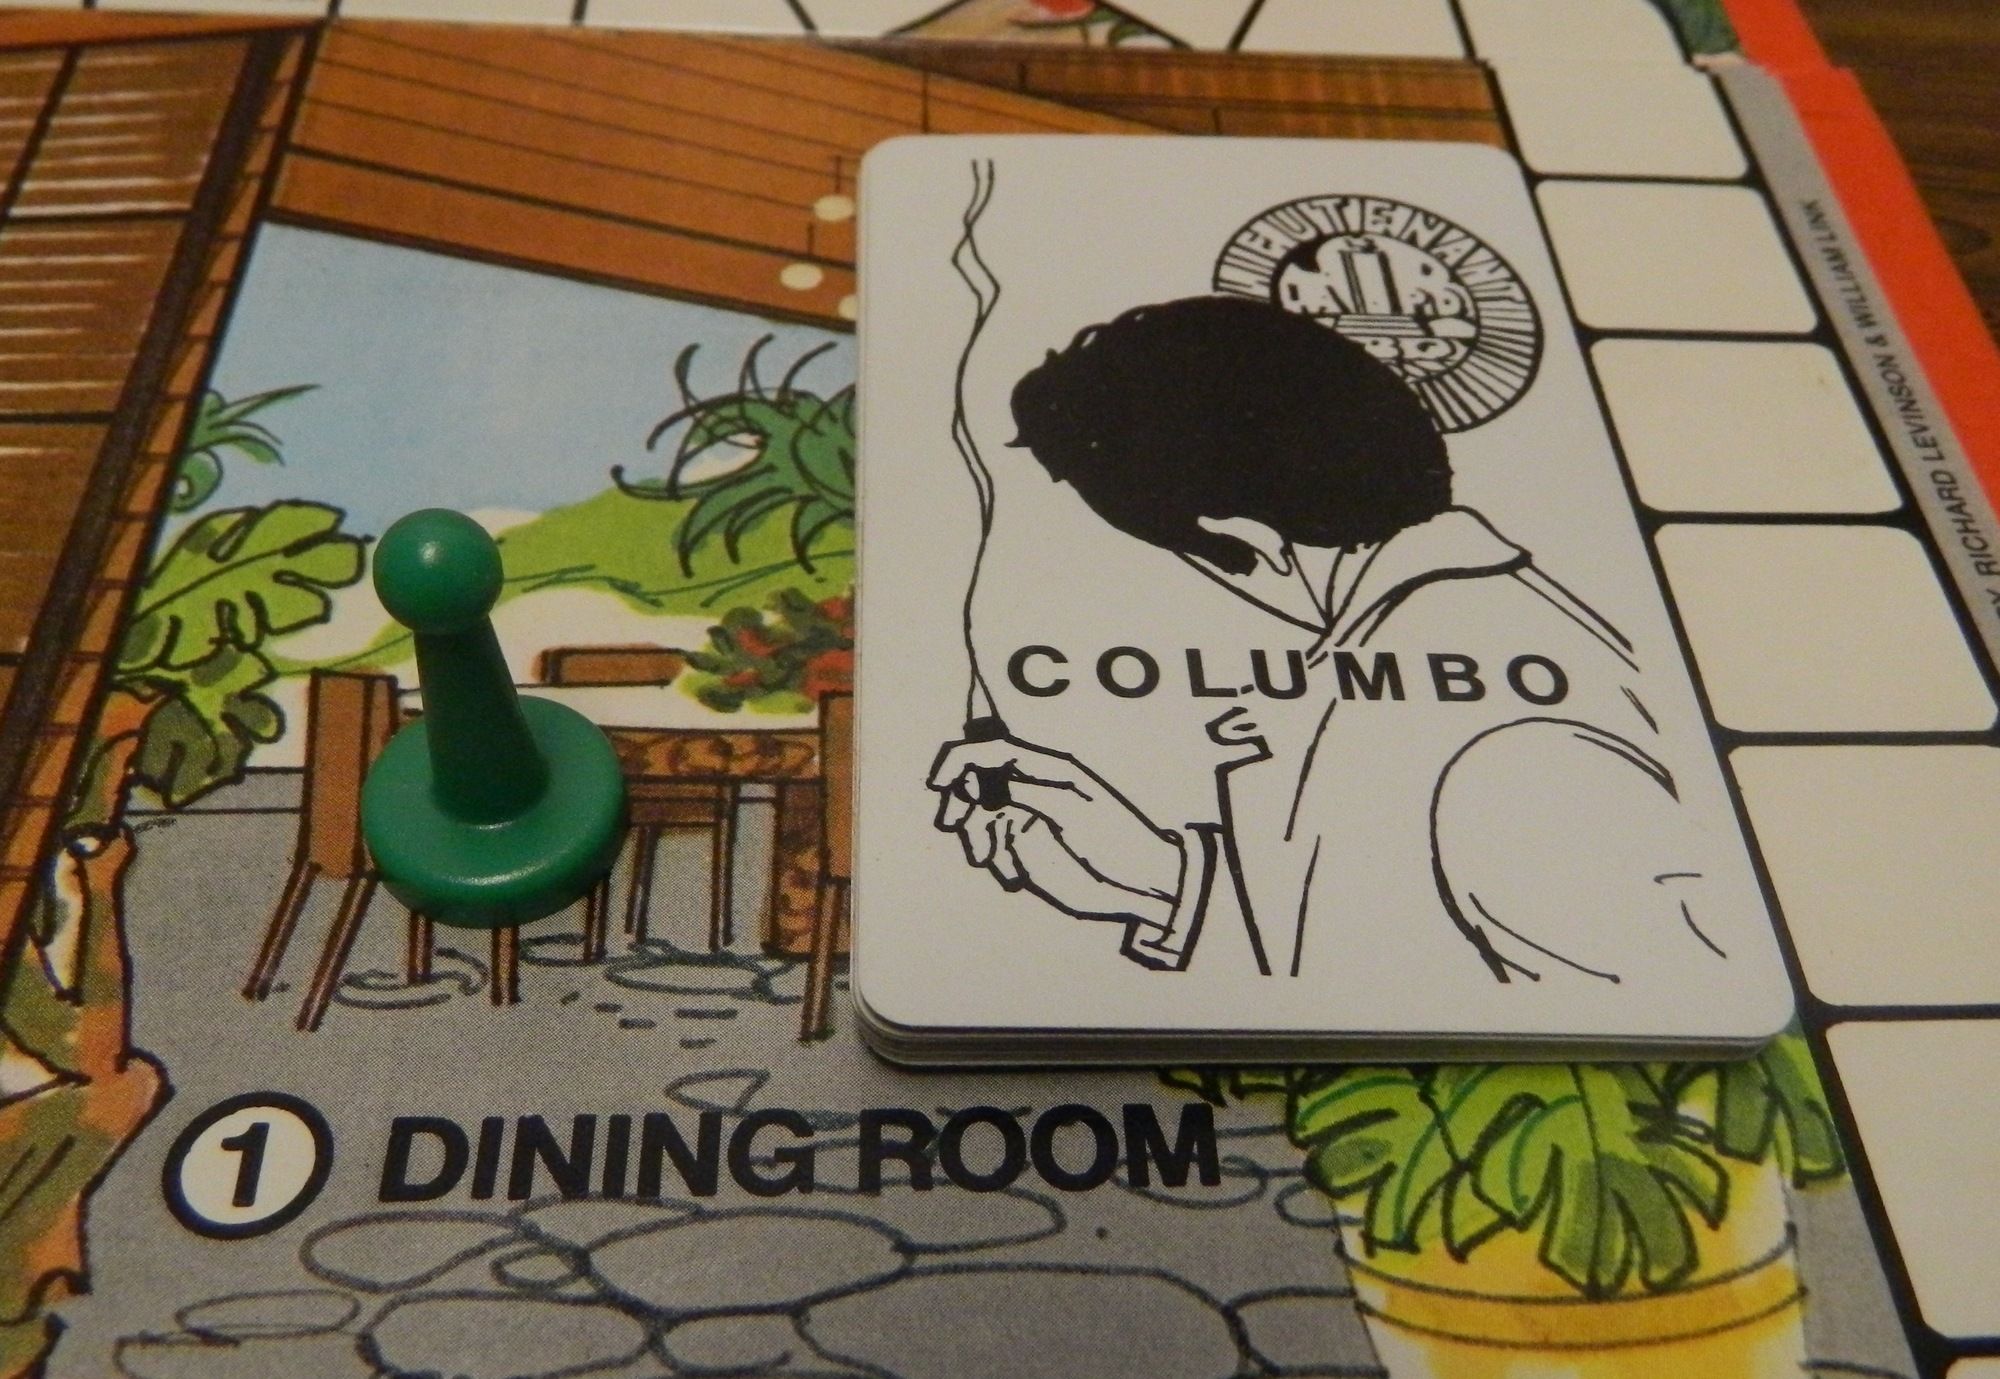 A picture of the Columbo board game, created in 1973. Shows the draw card mechanism, and the dining room area.